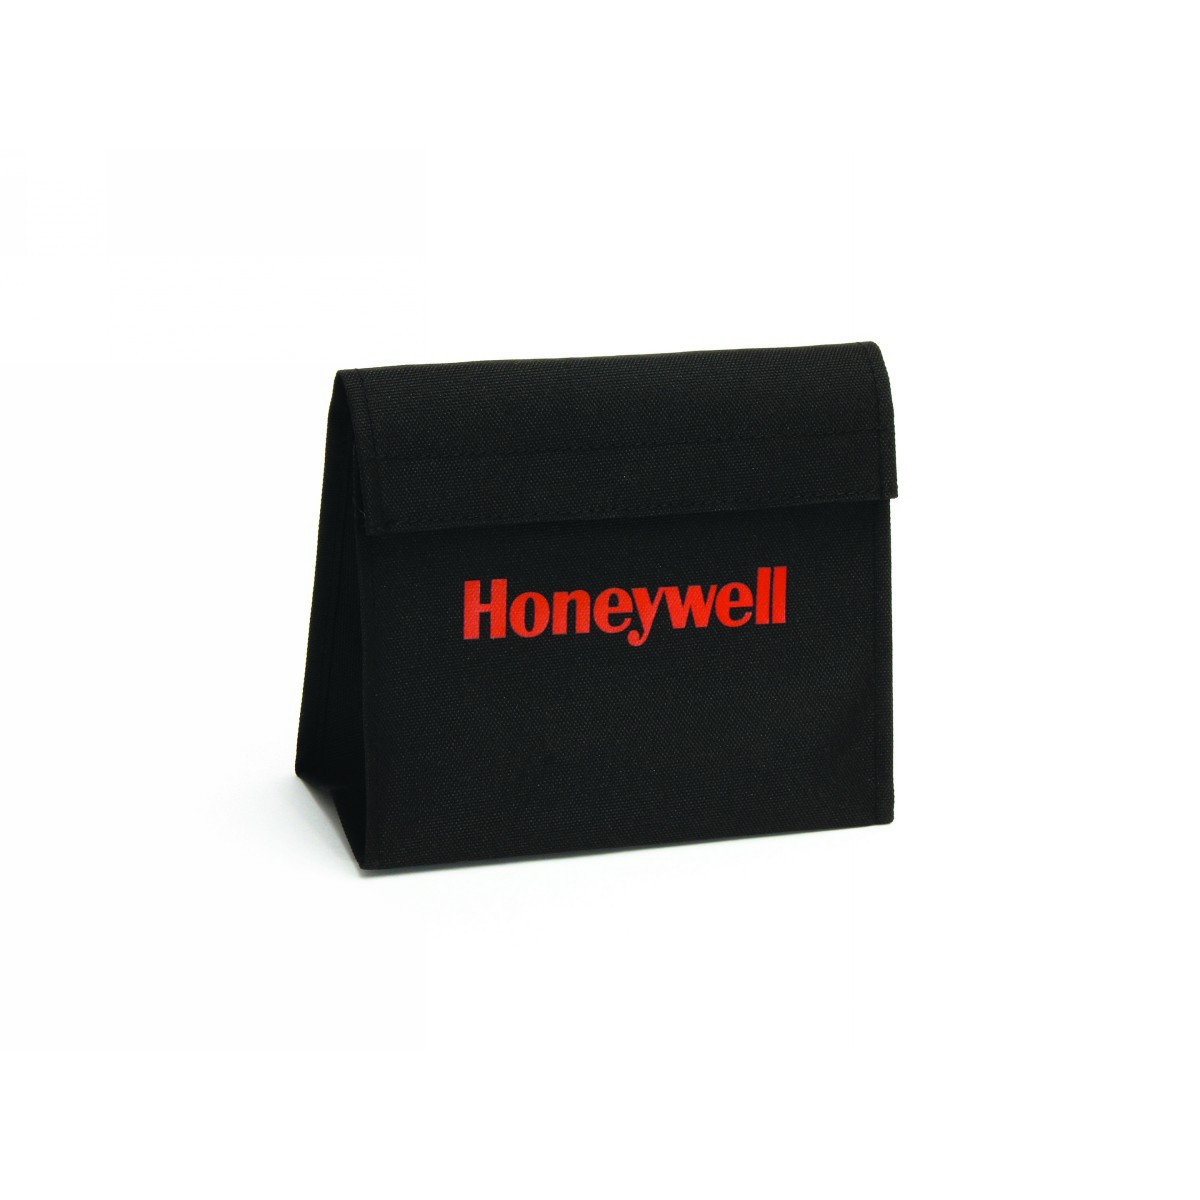 Honeywell Nylon Hook And Loop Carrying Bag For 7190 Welding Mask/CFR/7900 Mouthbit (Availability restrictions apply.)